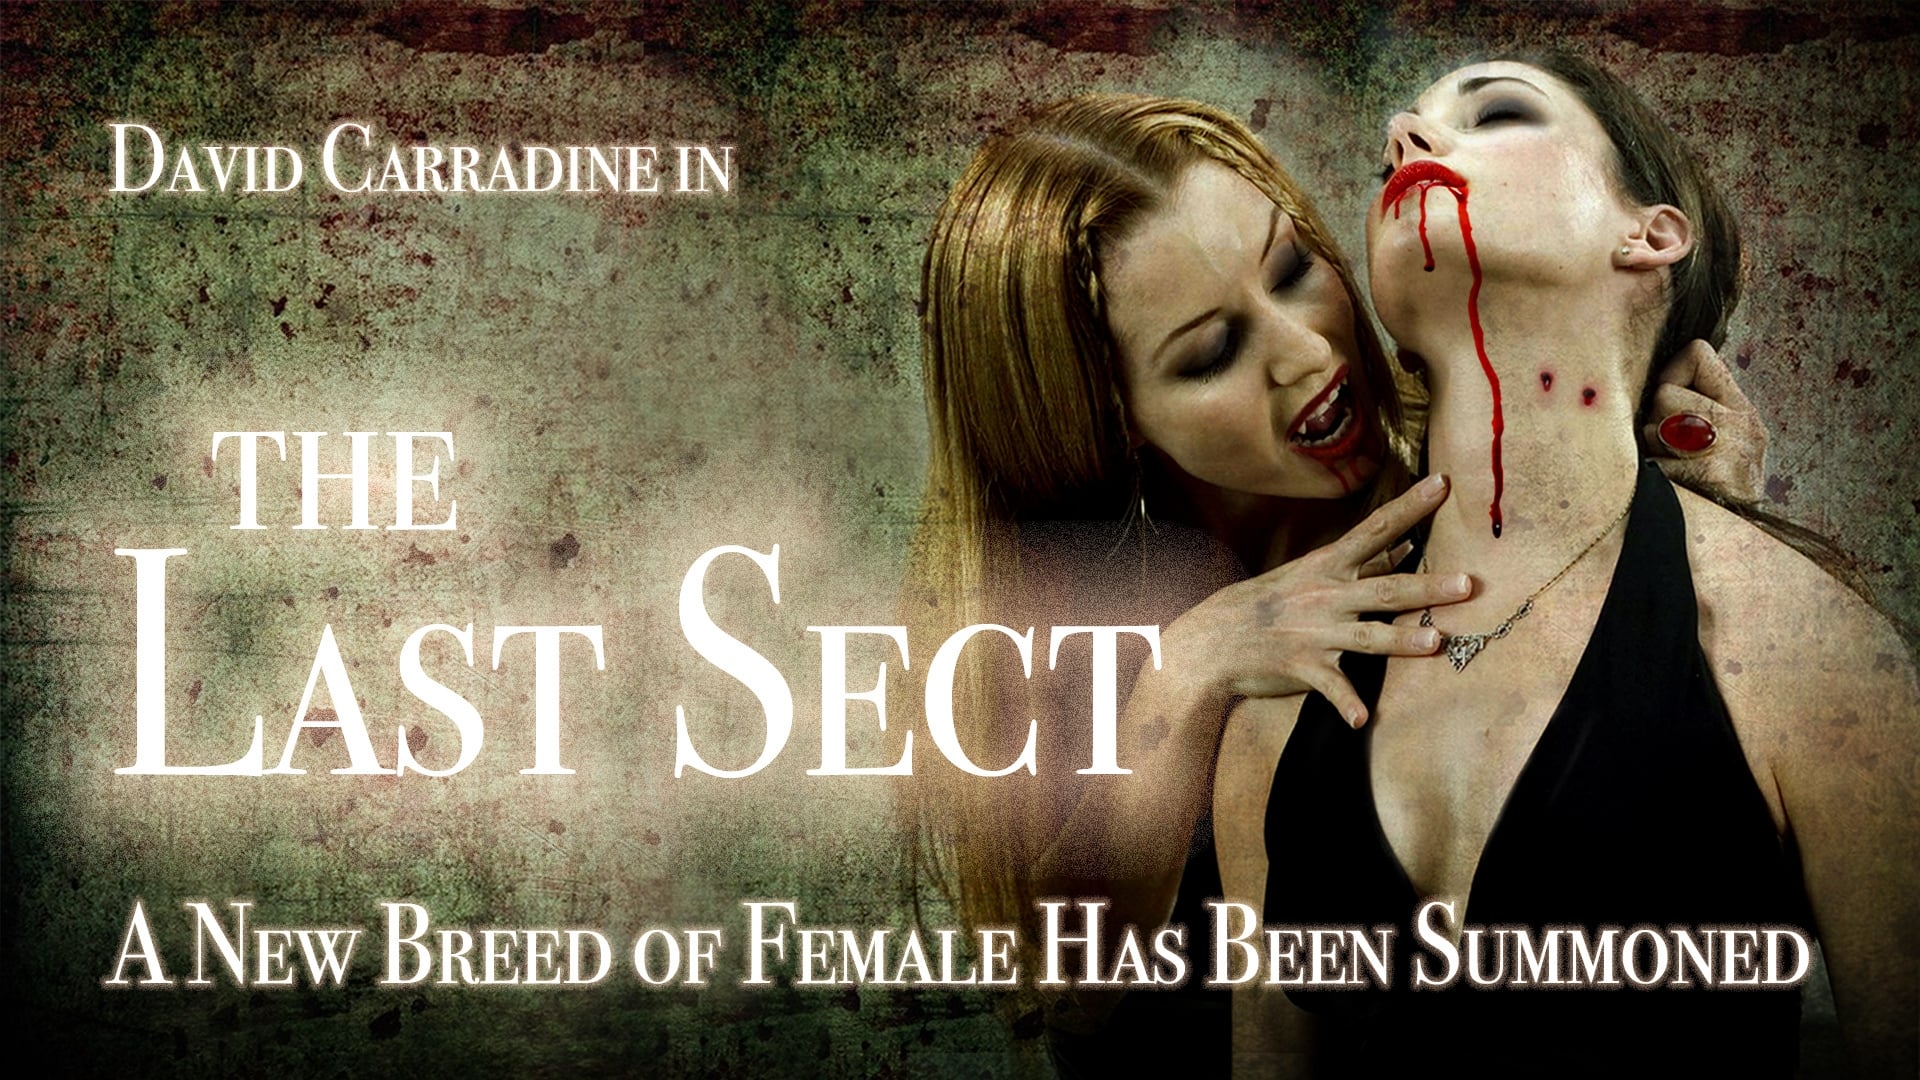 The Last Sect - film